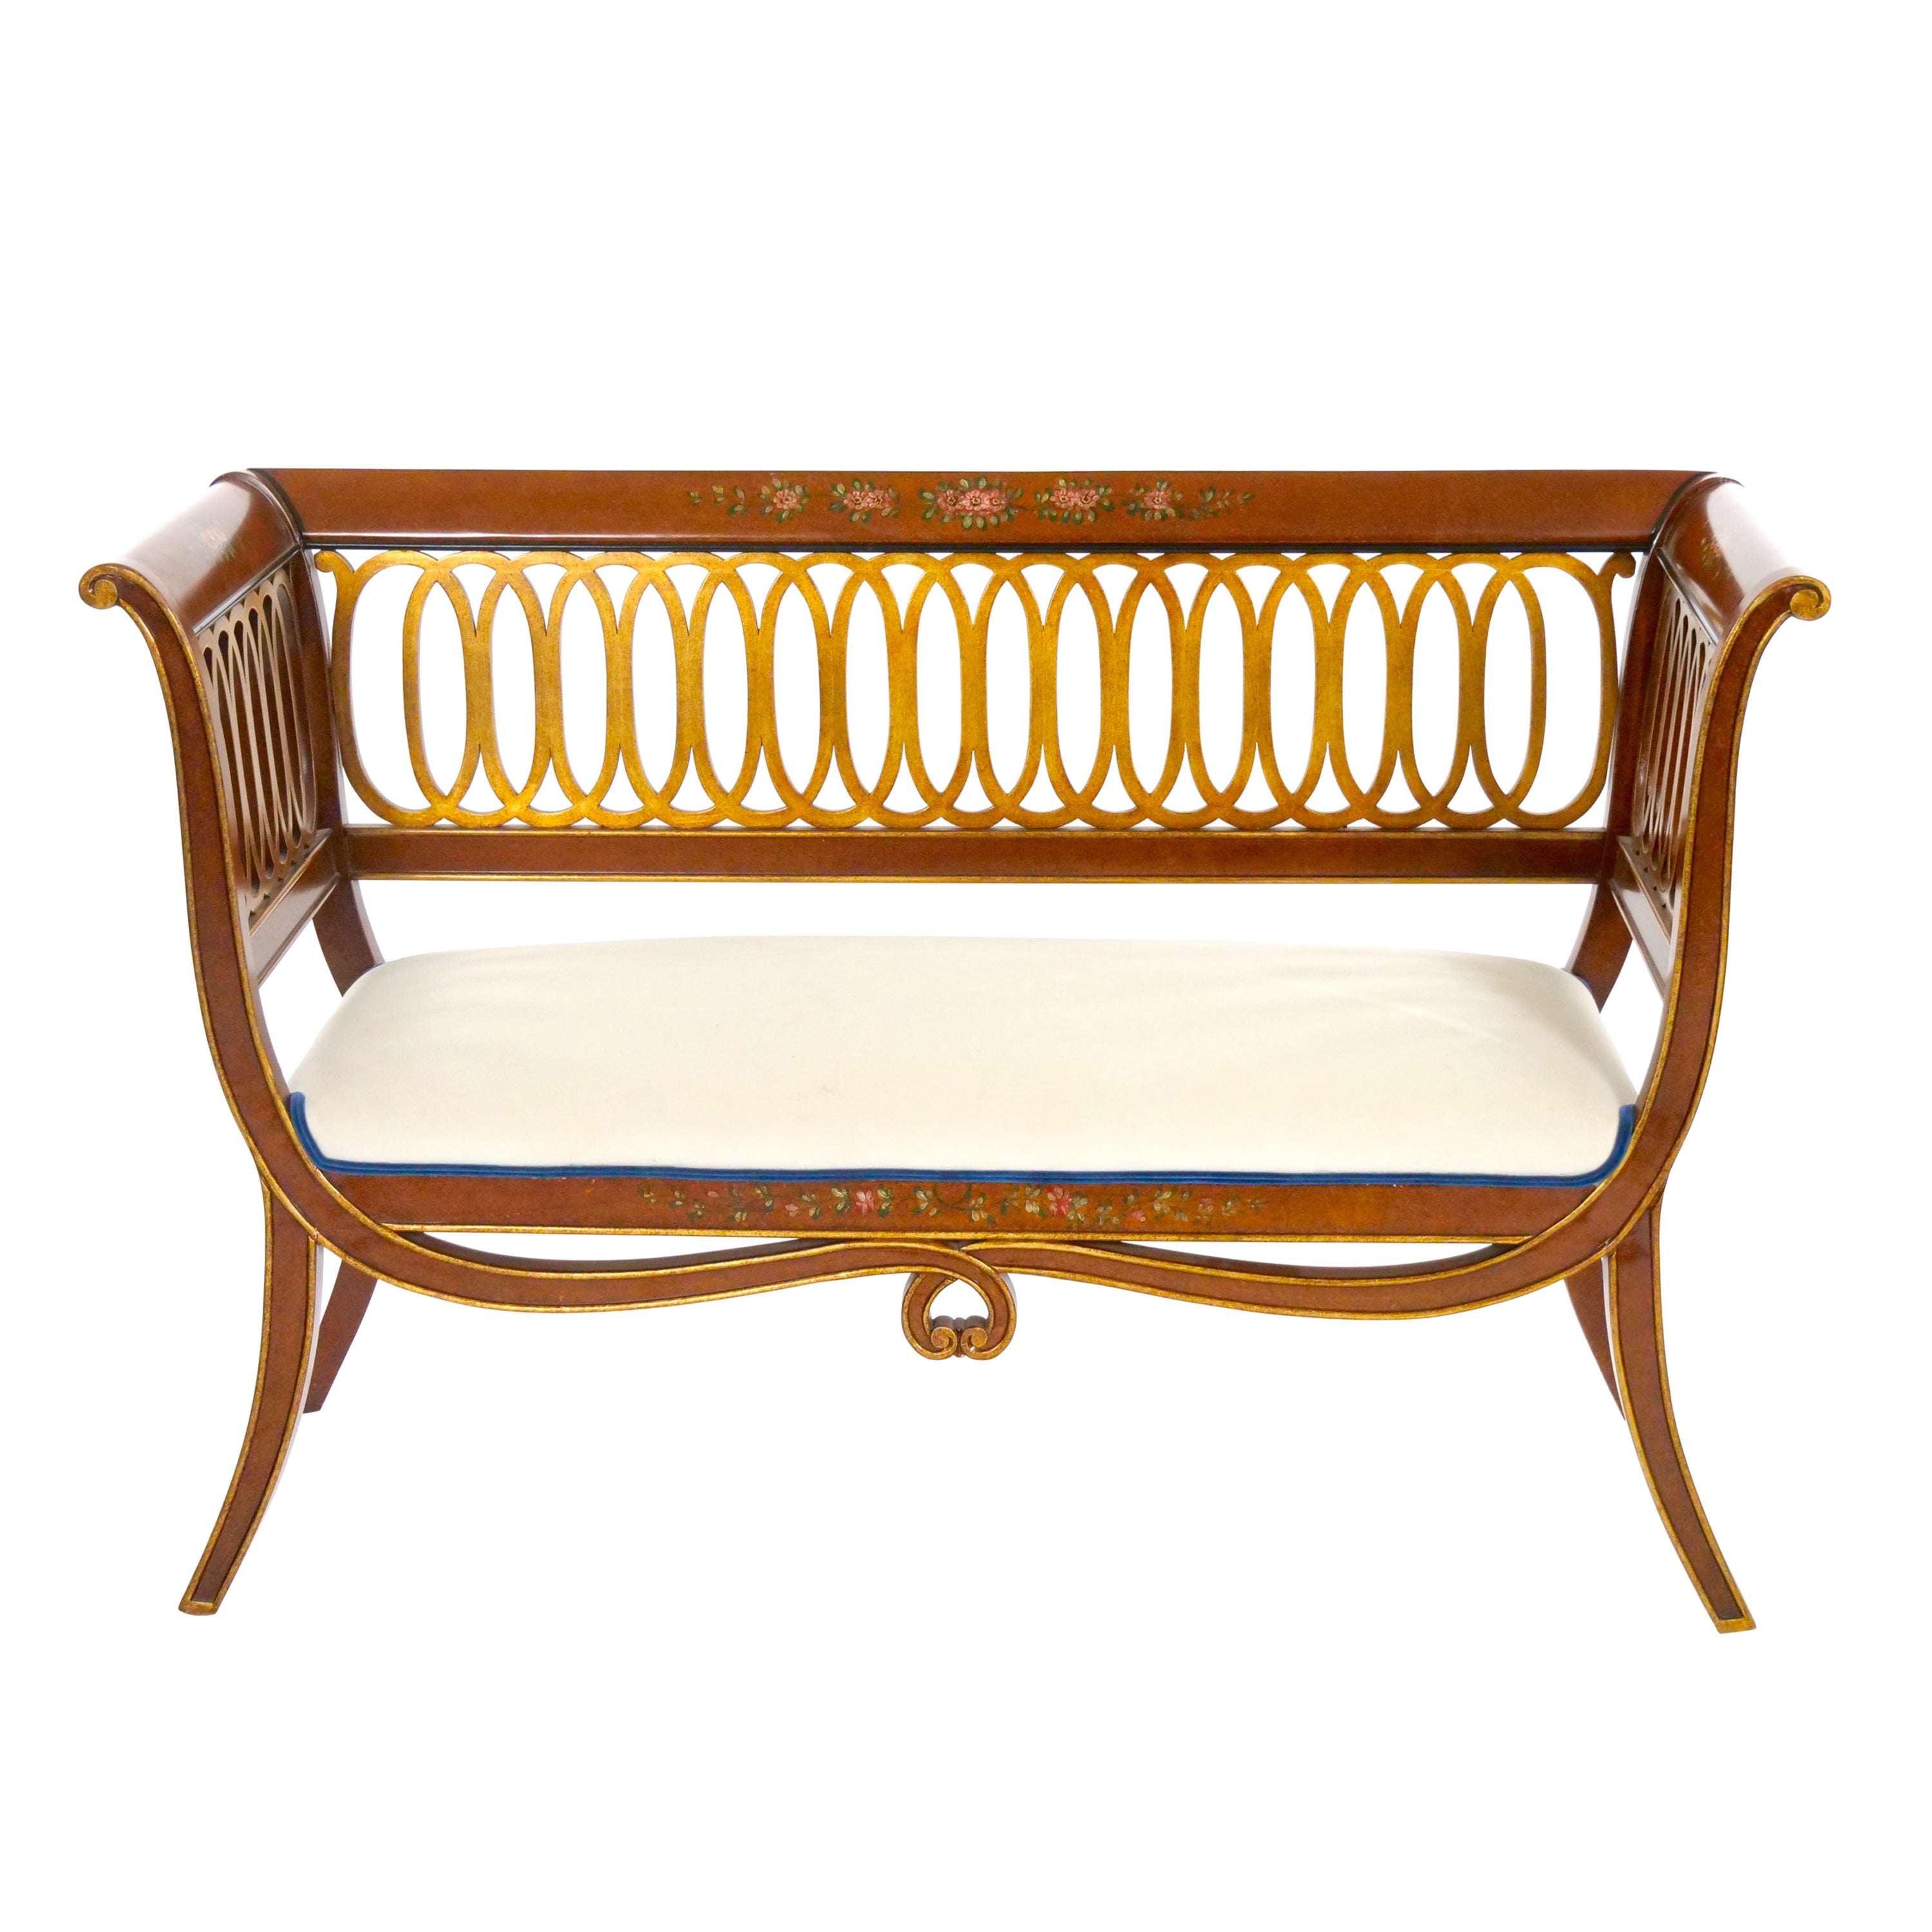 Hand-Painted & Partially Gilt Adams Style Small Settee